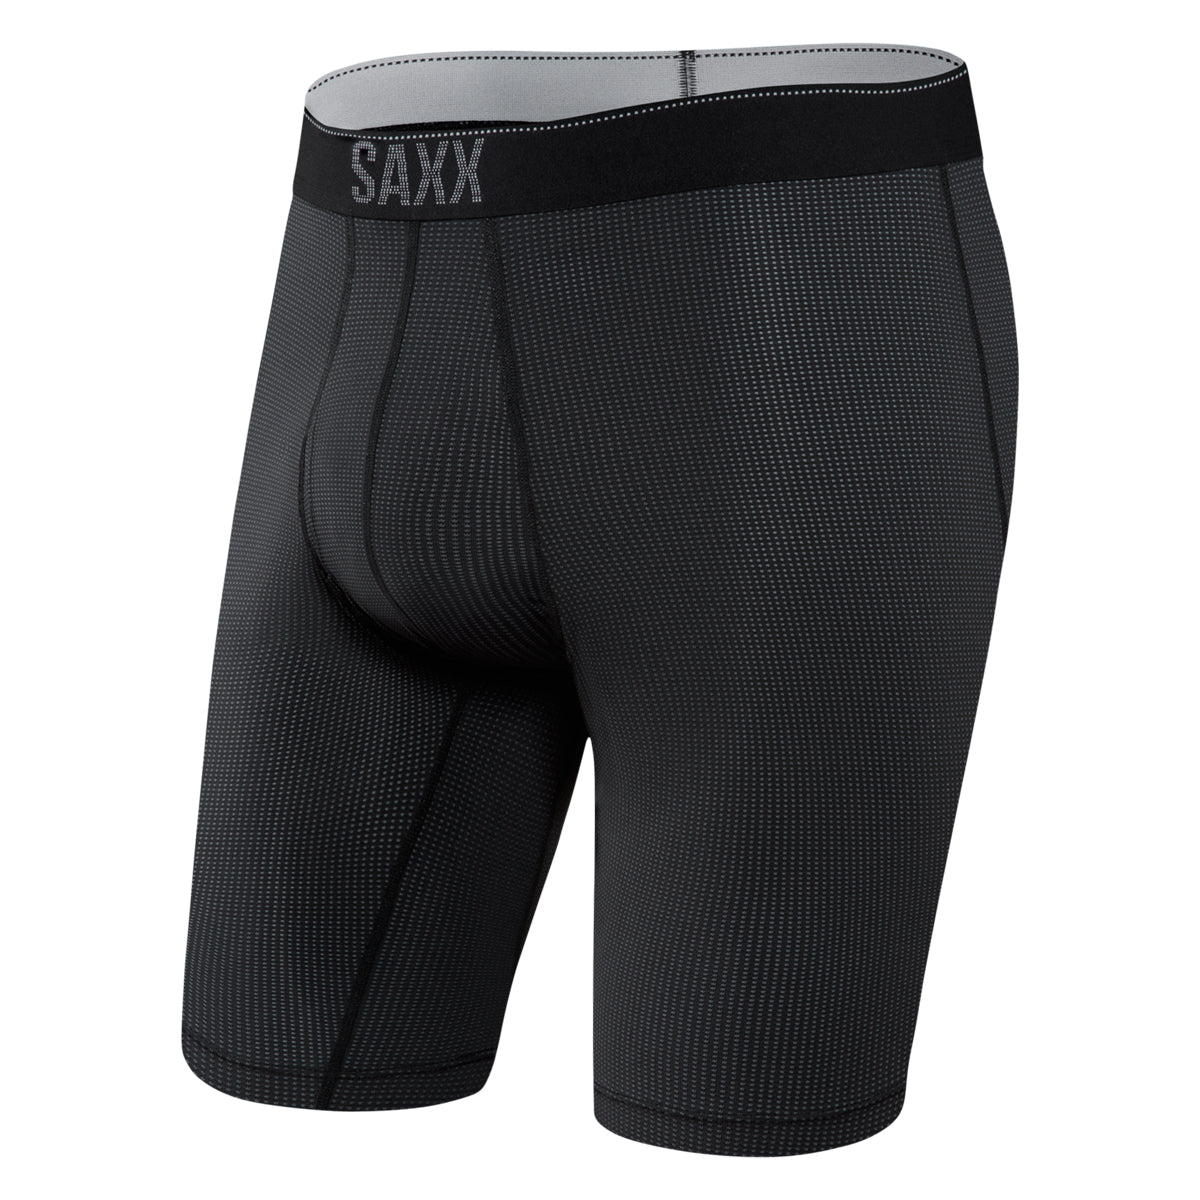 SAXX Quest Long Boxer Brief in  by GOHUNT | SAXX - GOHUNT Shop